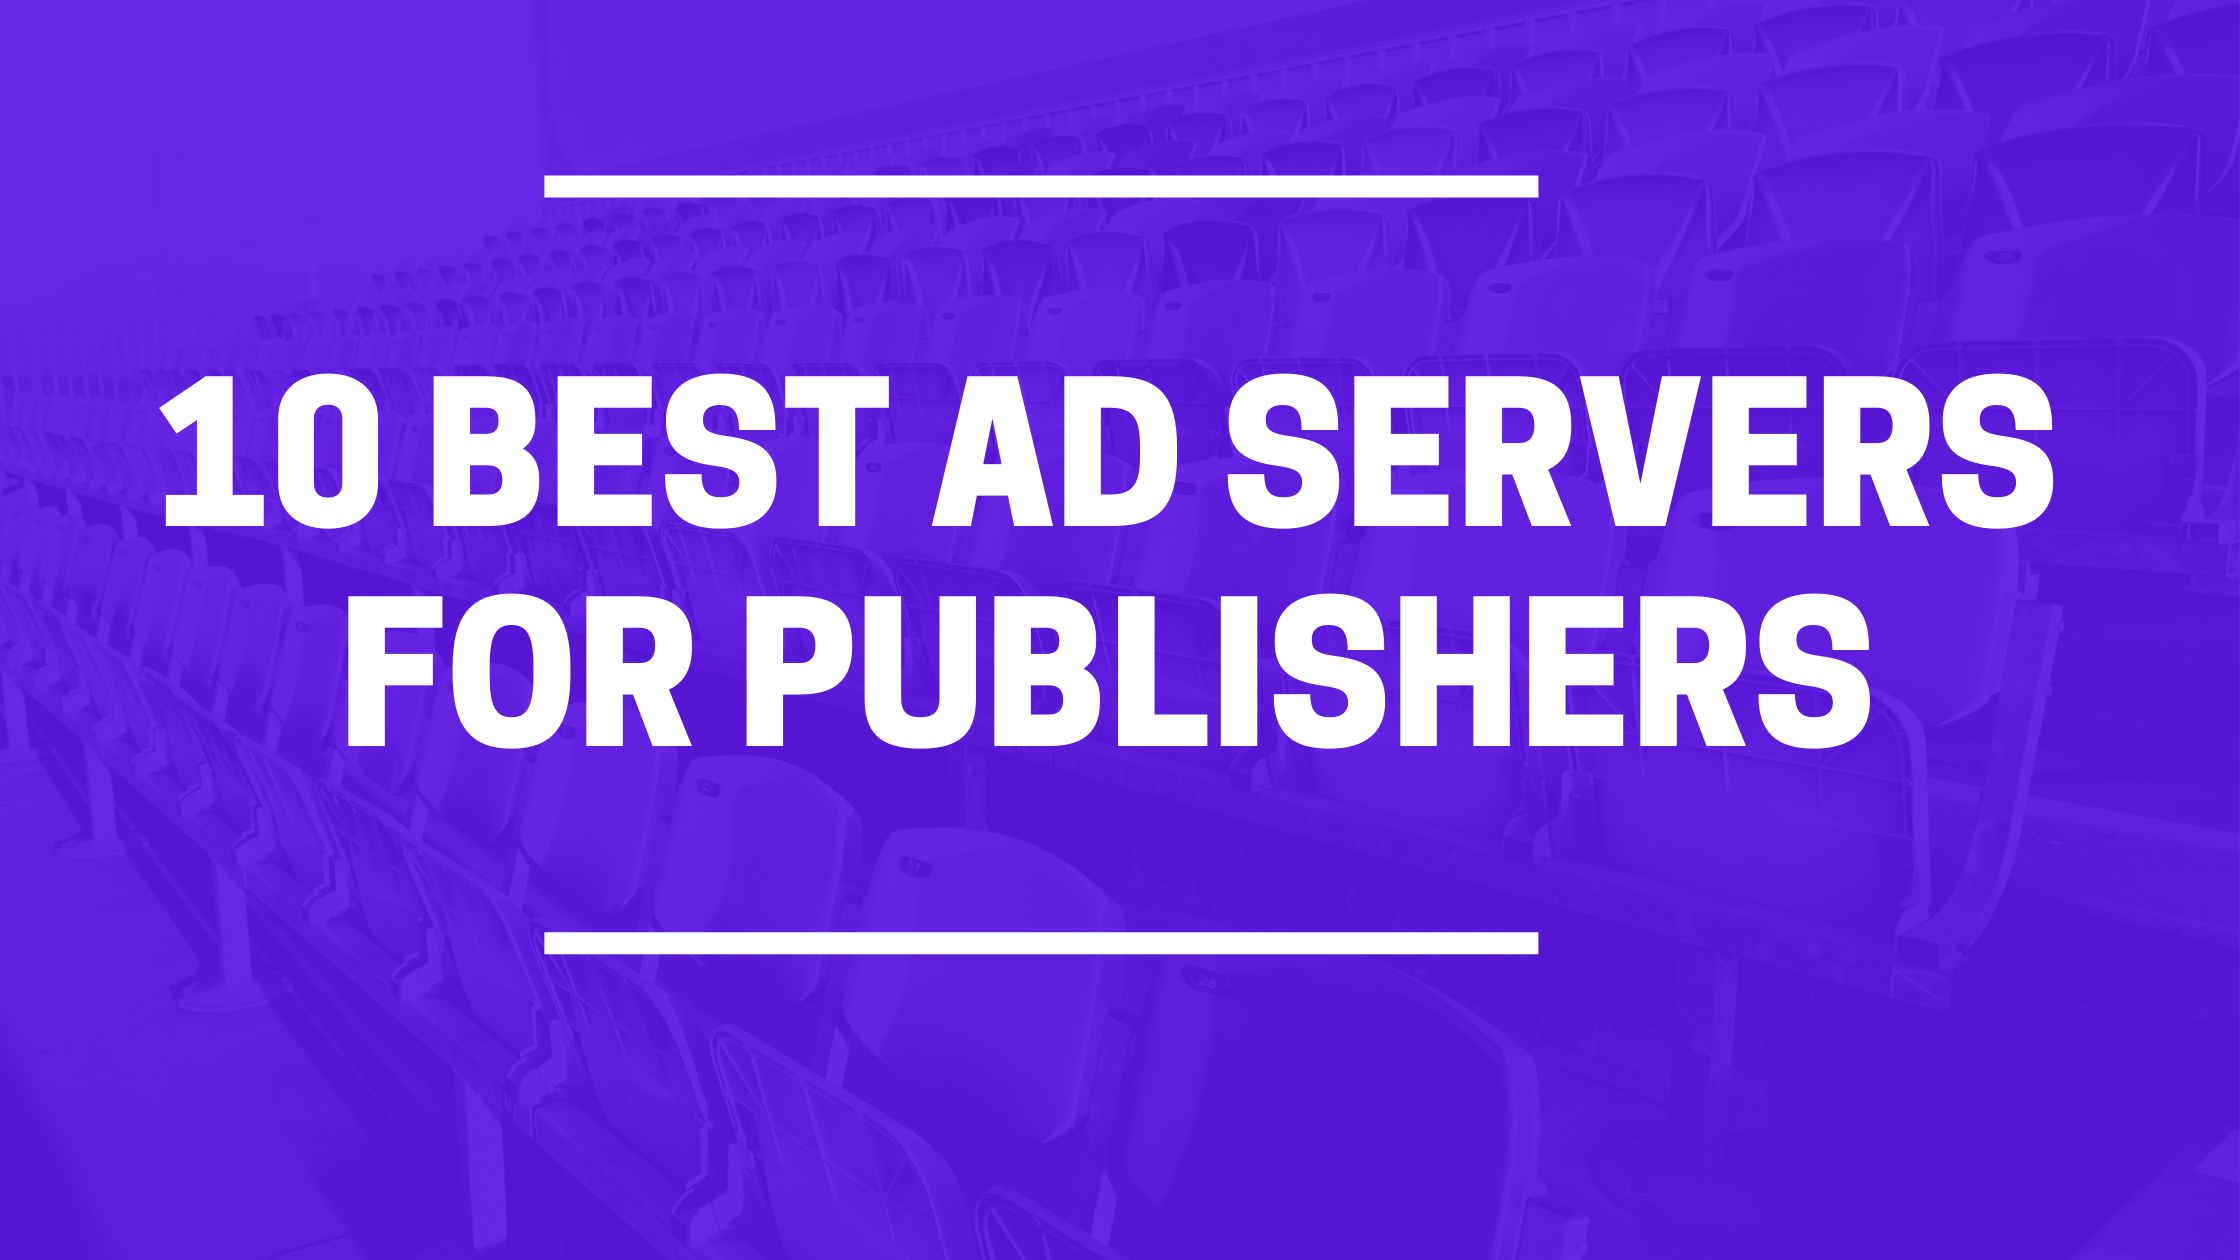 ` Best Ad Servers For Publishers